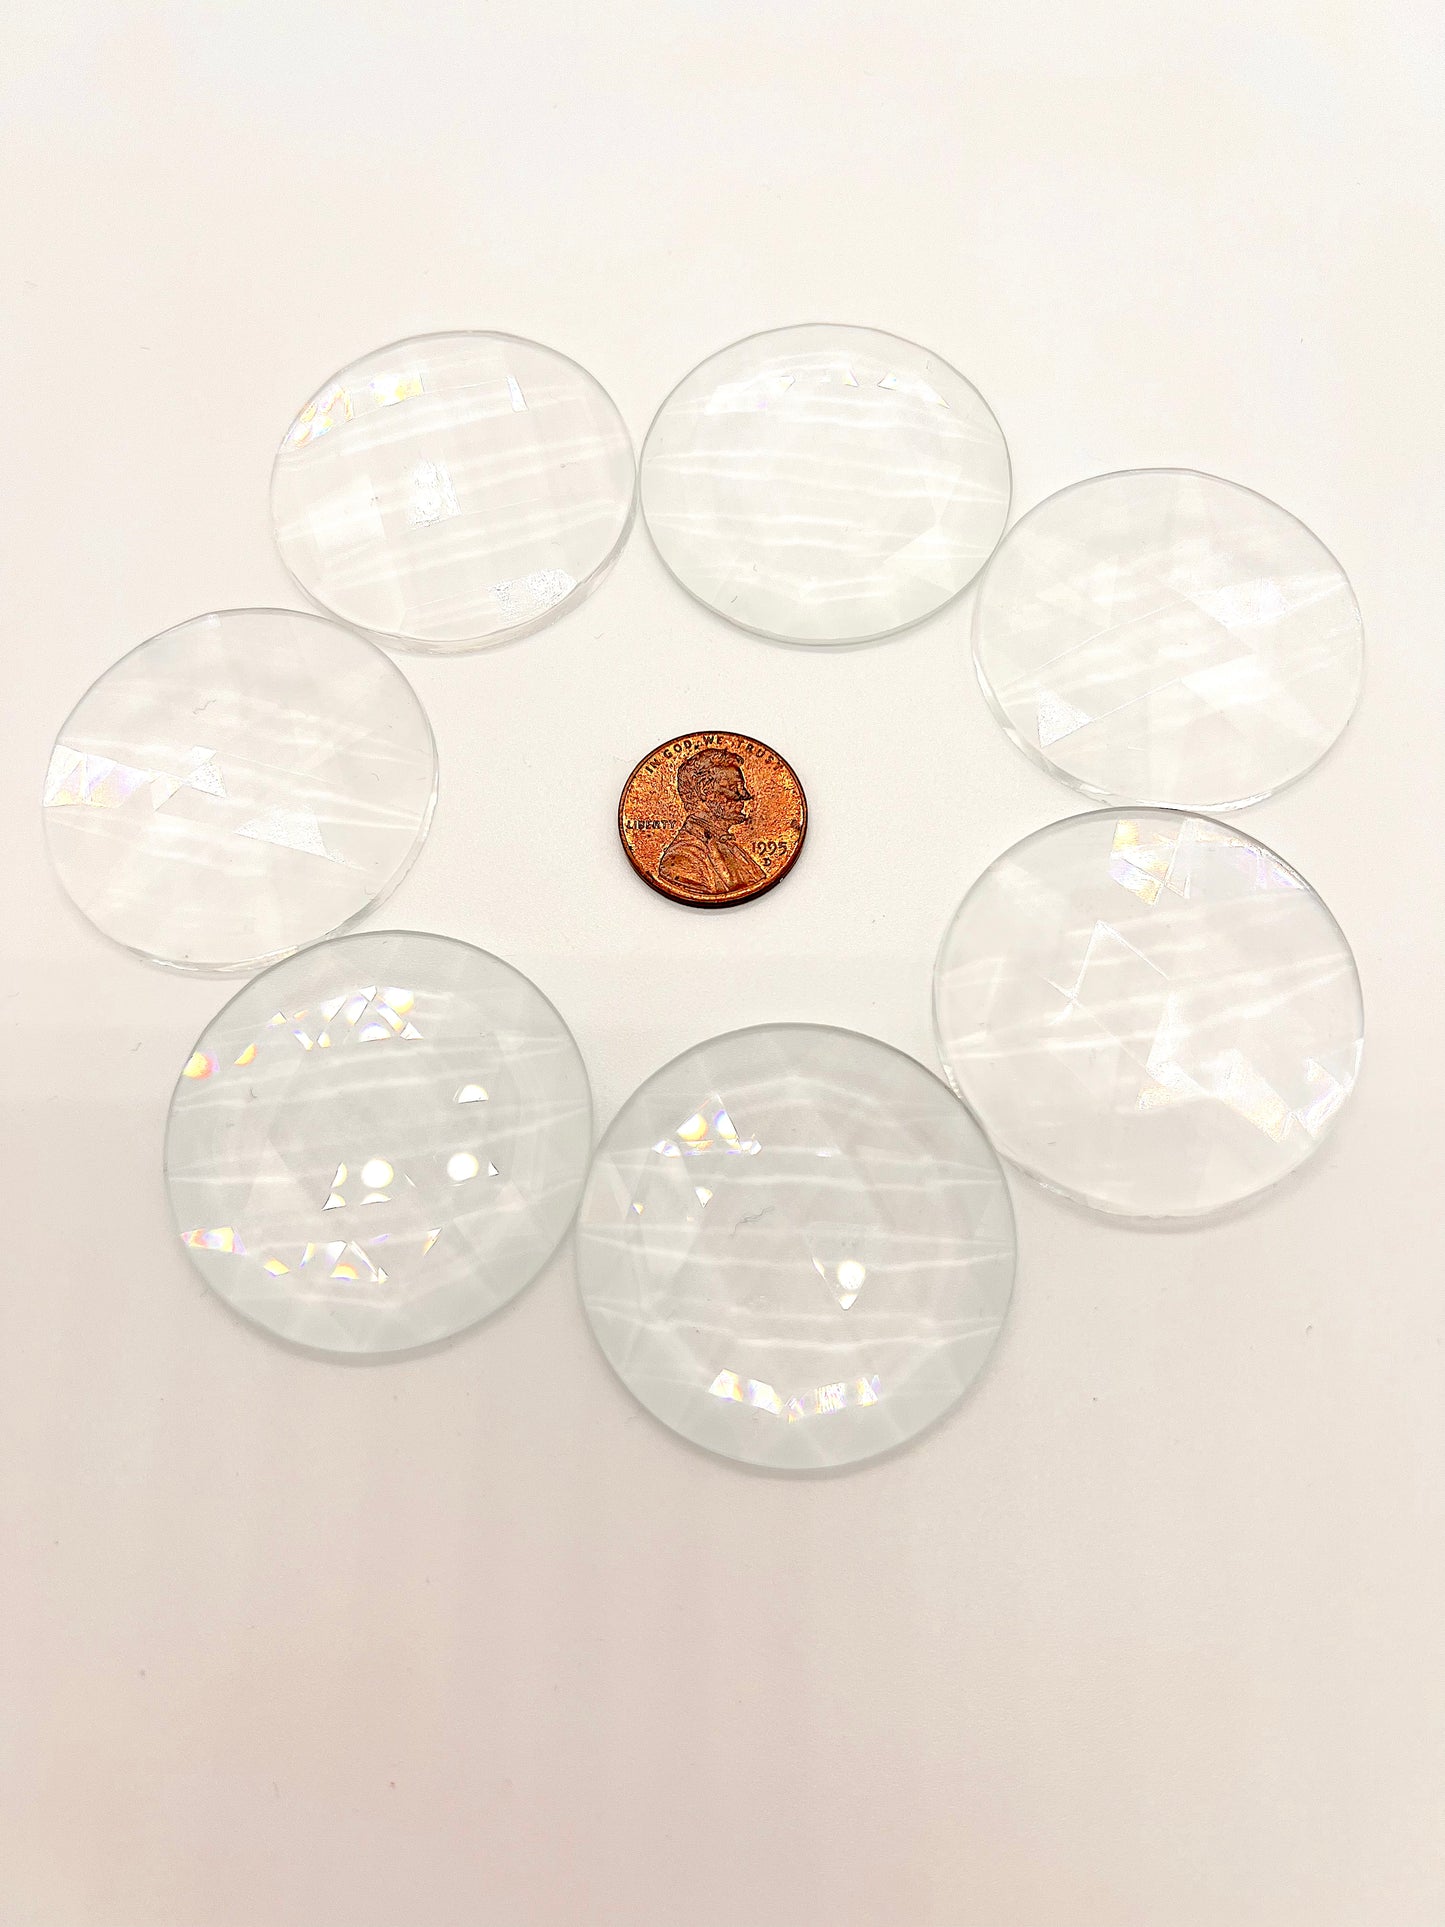 2qty - 40mm Clear Round Faceted Flat Backed Jewel for Stained Glass, Mosaics, Tiffany Lamps